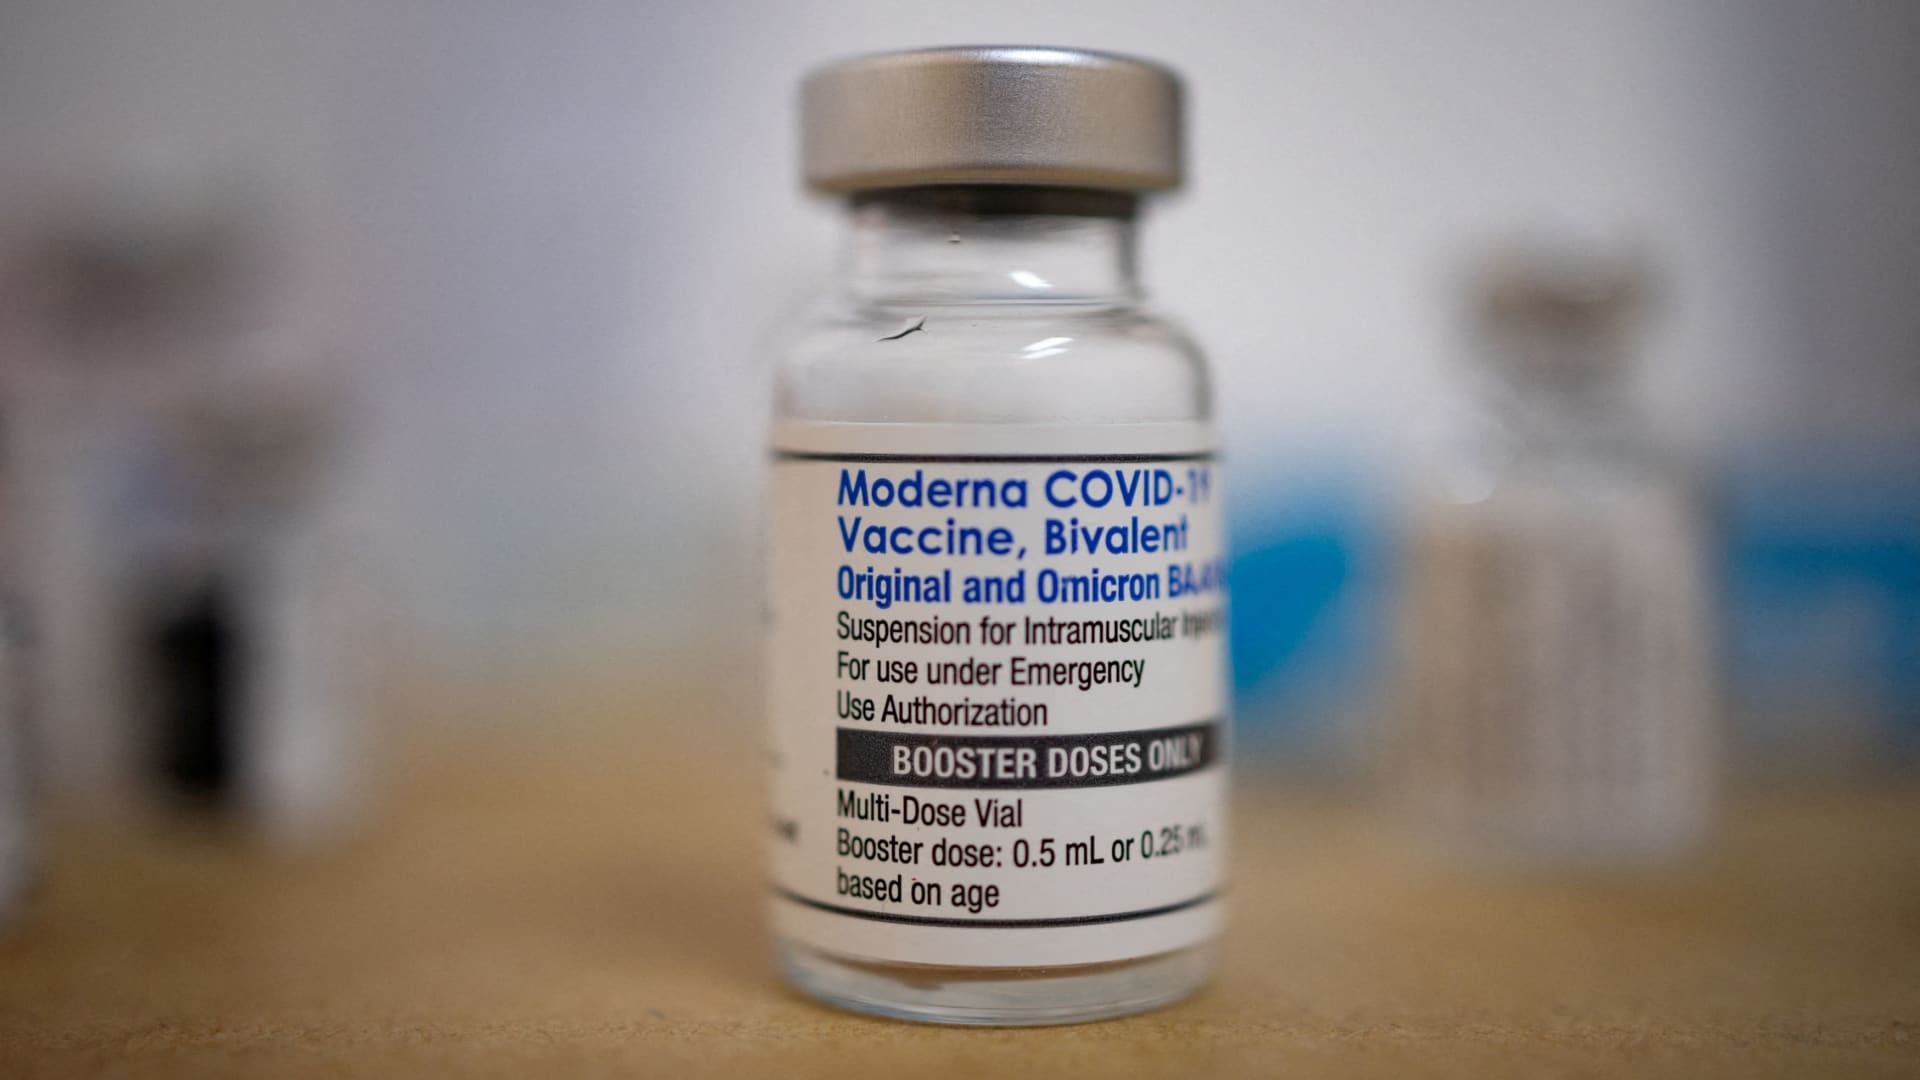 CDC recommends updated Covid vaccines for everyone ages 6 months and up, allowing shots to start within days